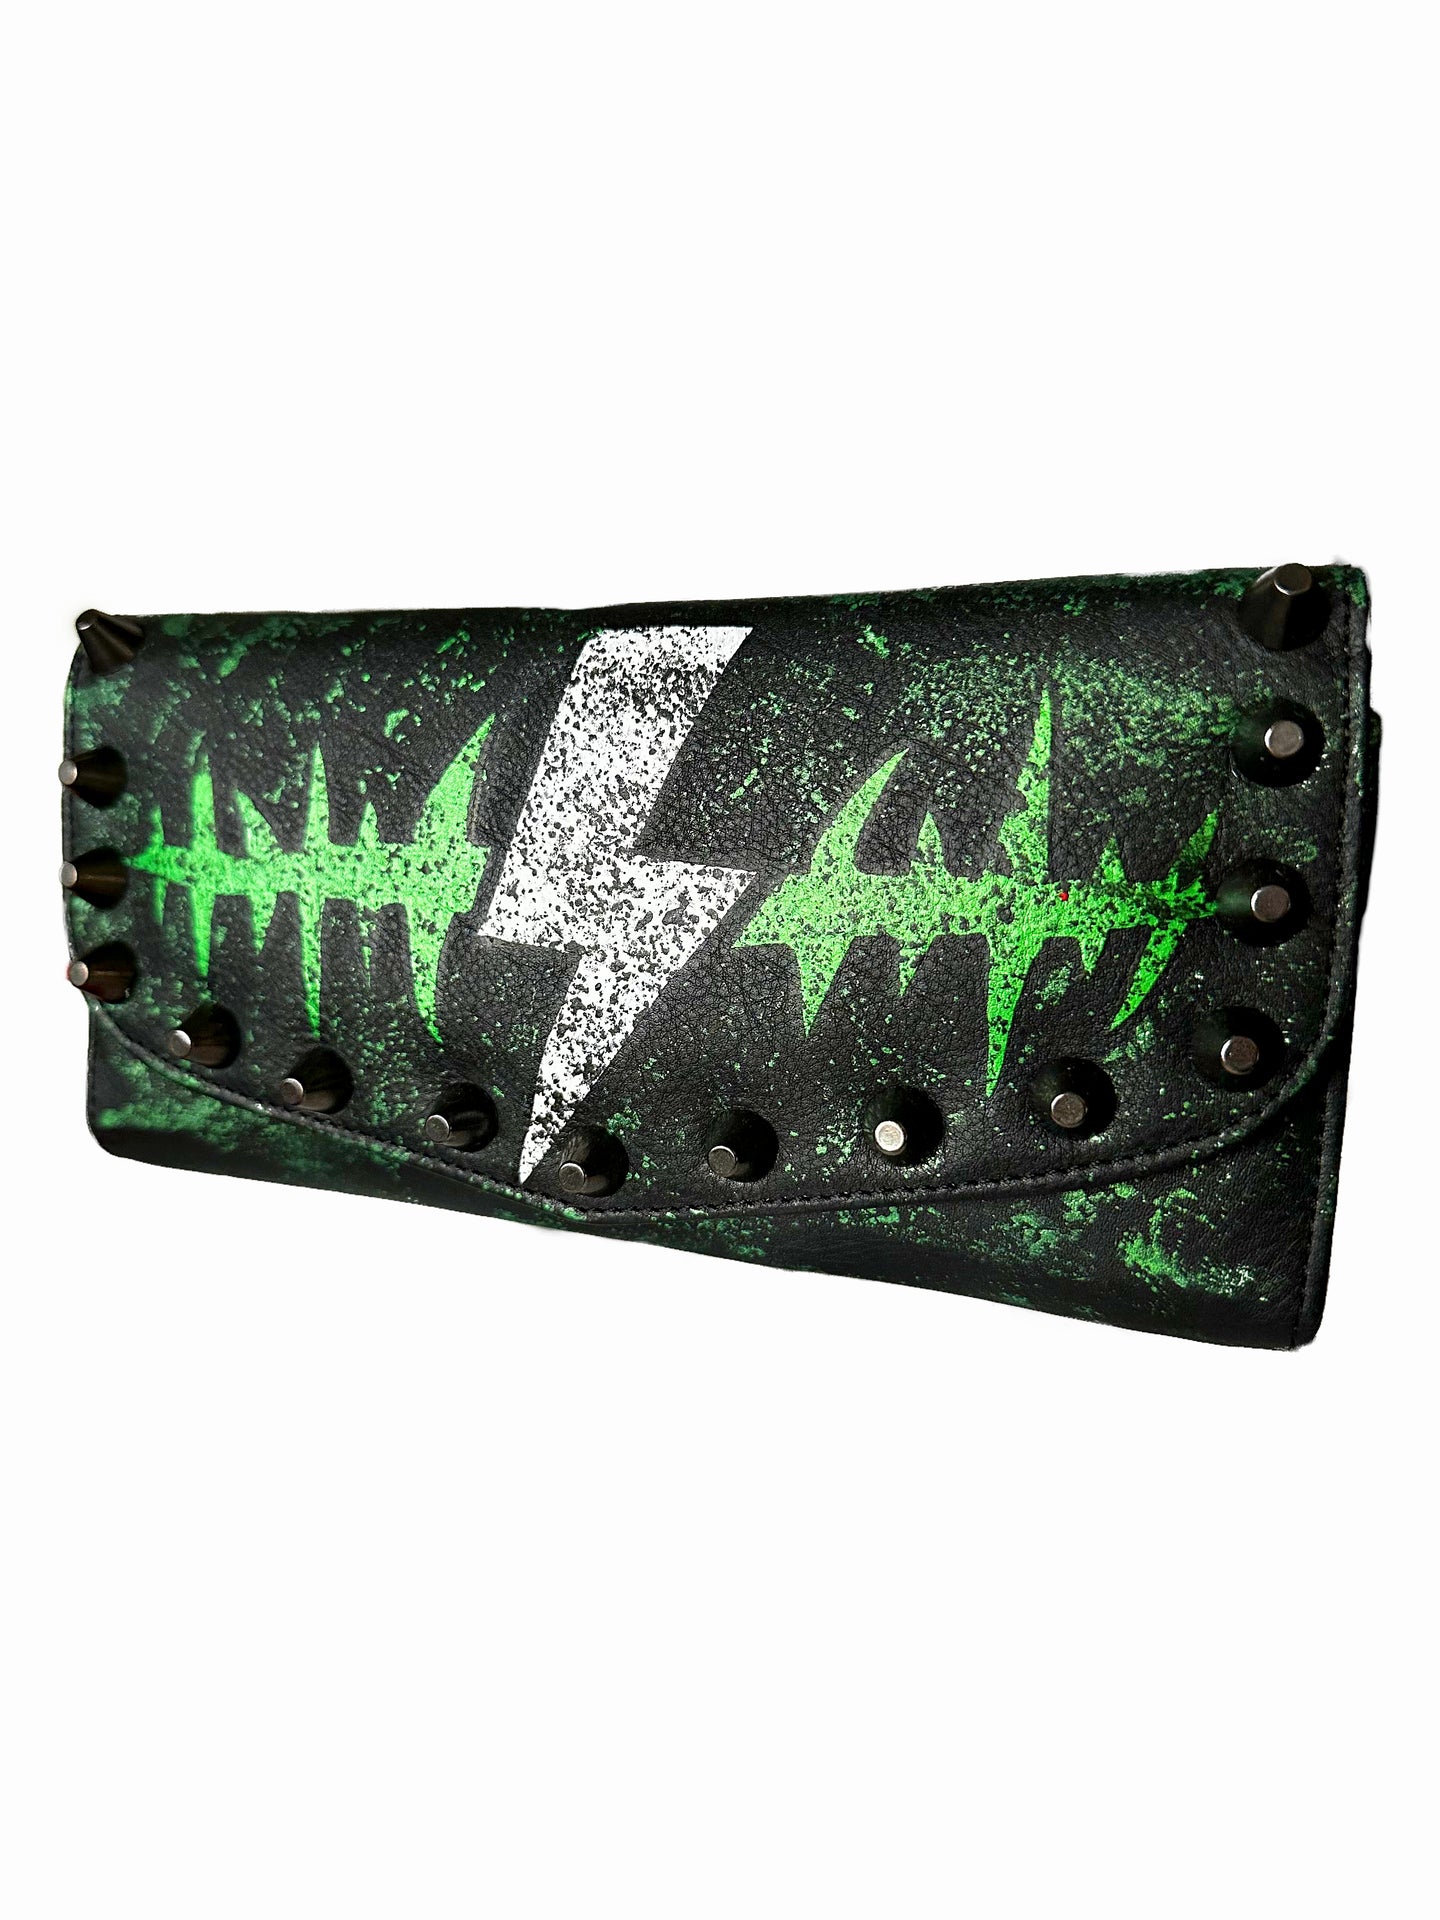 THE MONSTER STUDDED PURSE